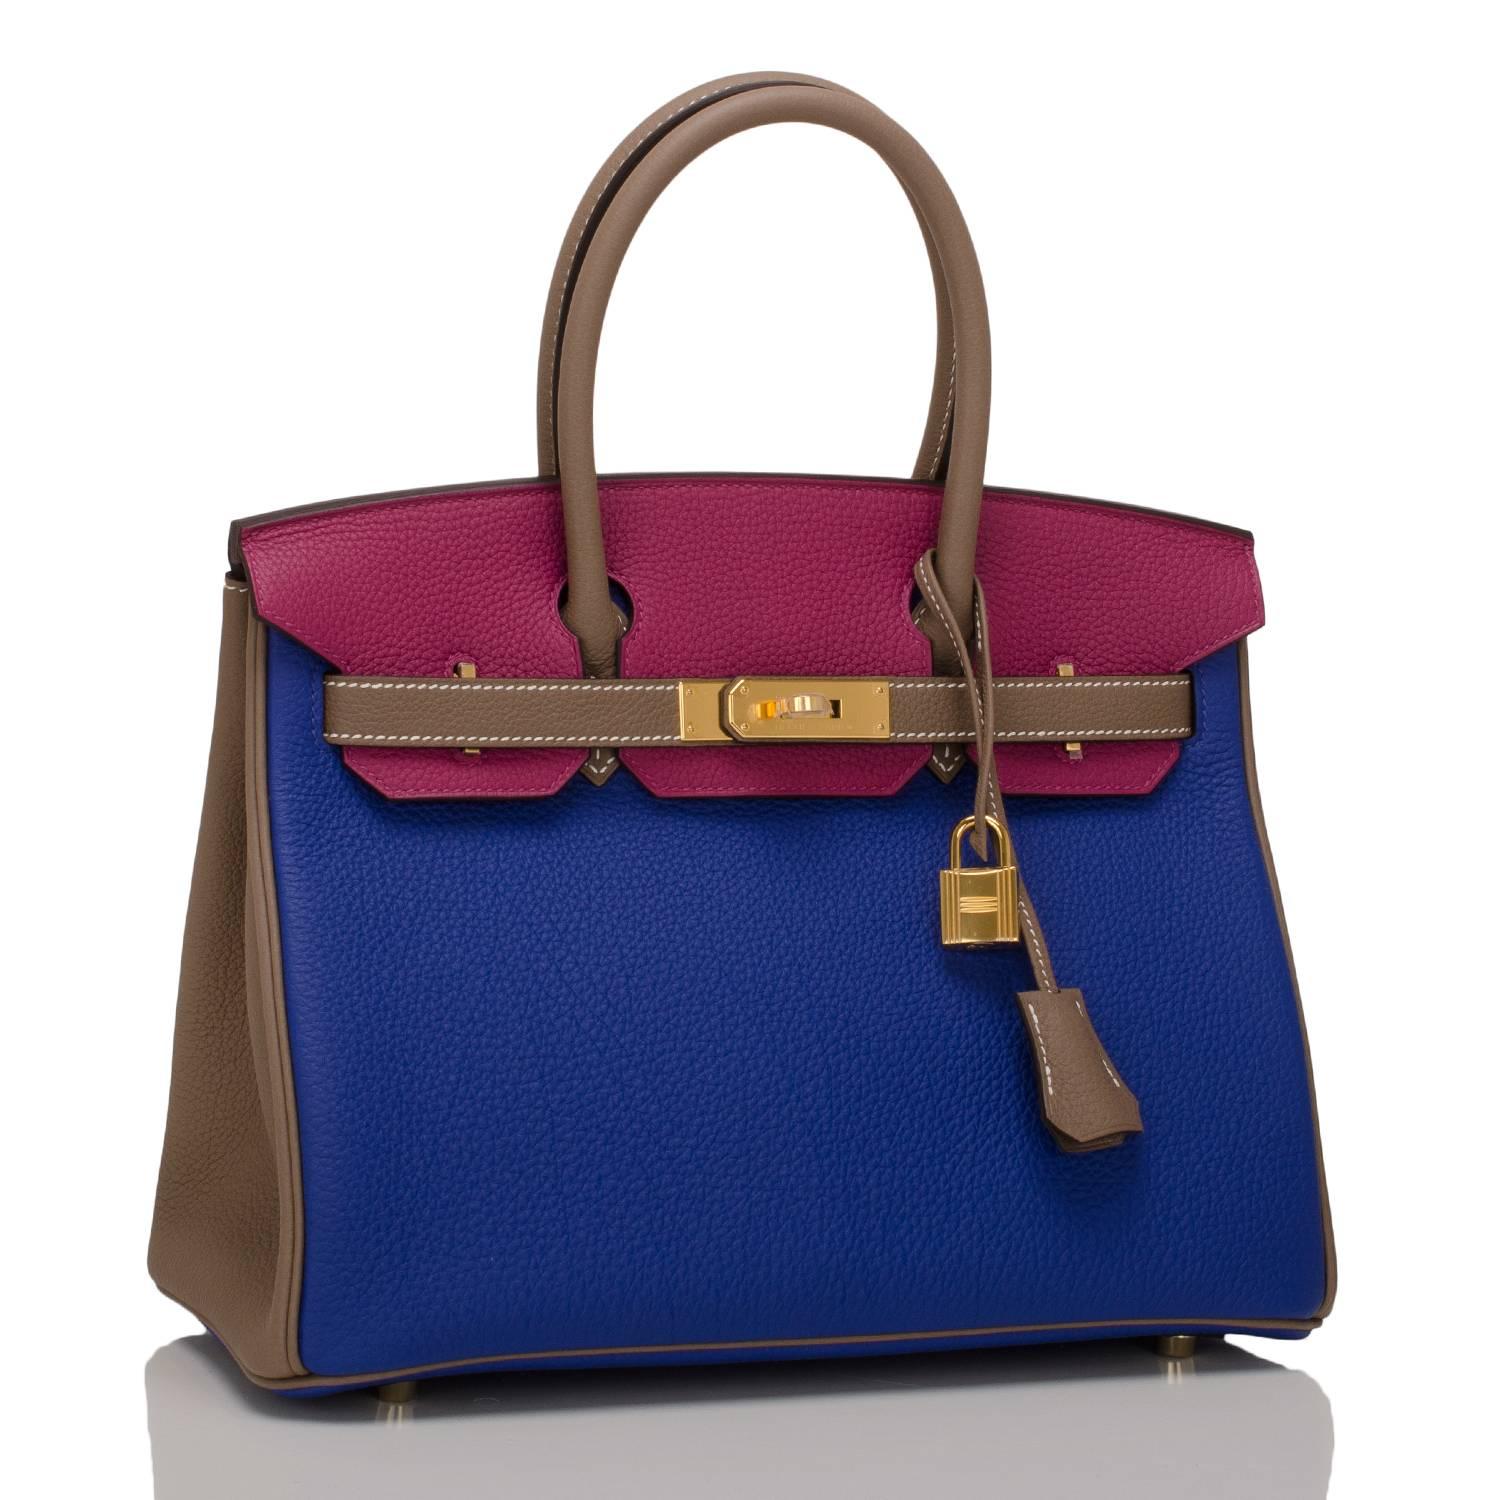 Hermes Horseshoe Stamped Birkin 30cm of Blue Electric, Anenome, and Etoupe in togo leather with gold hardware.

This Special Order Birkin with Blue Electric front and bottom, Anenome back and front flap and Etoupe sides, handles, straps has gold